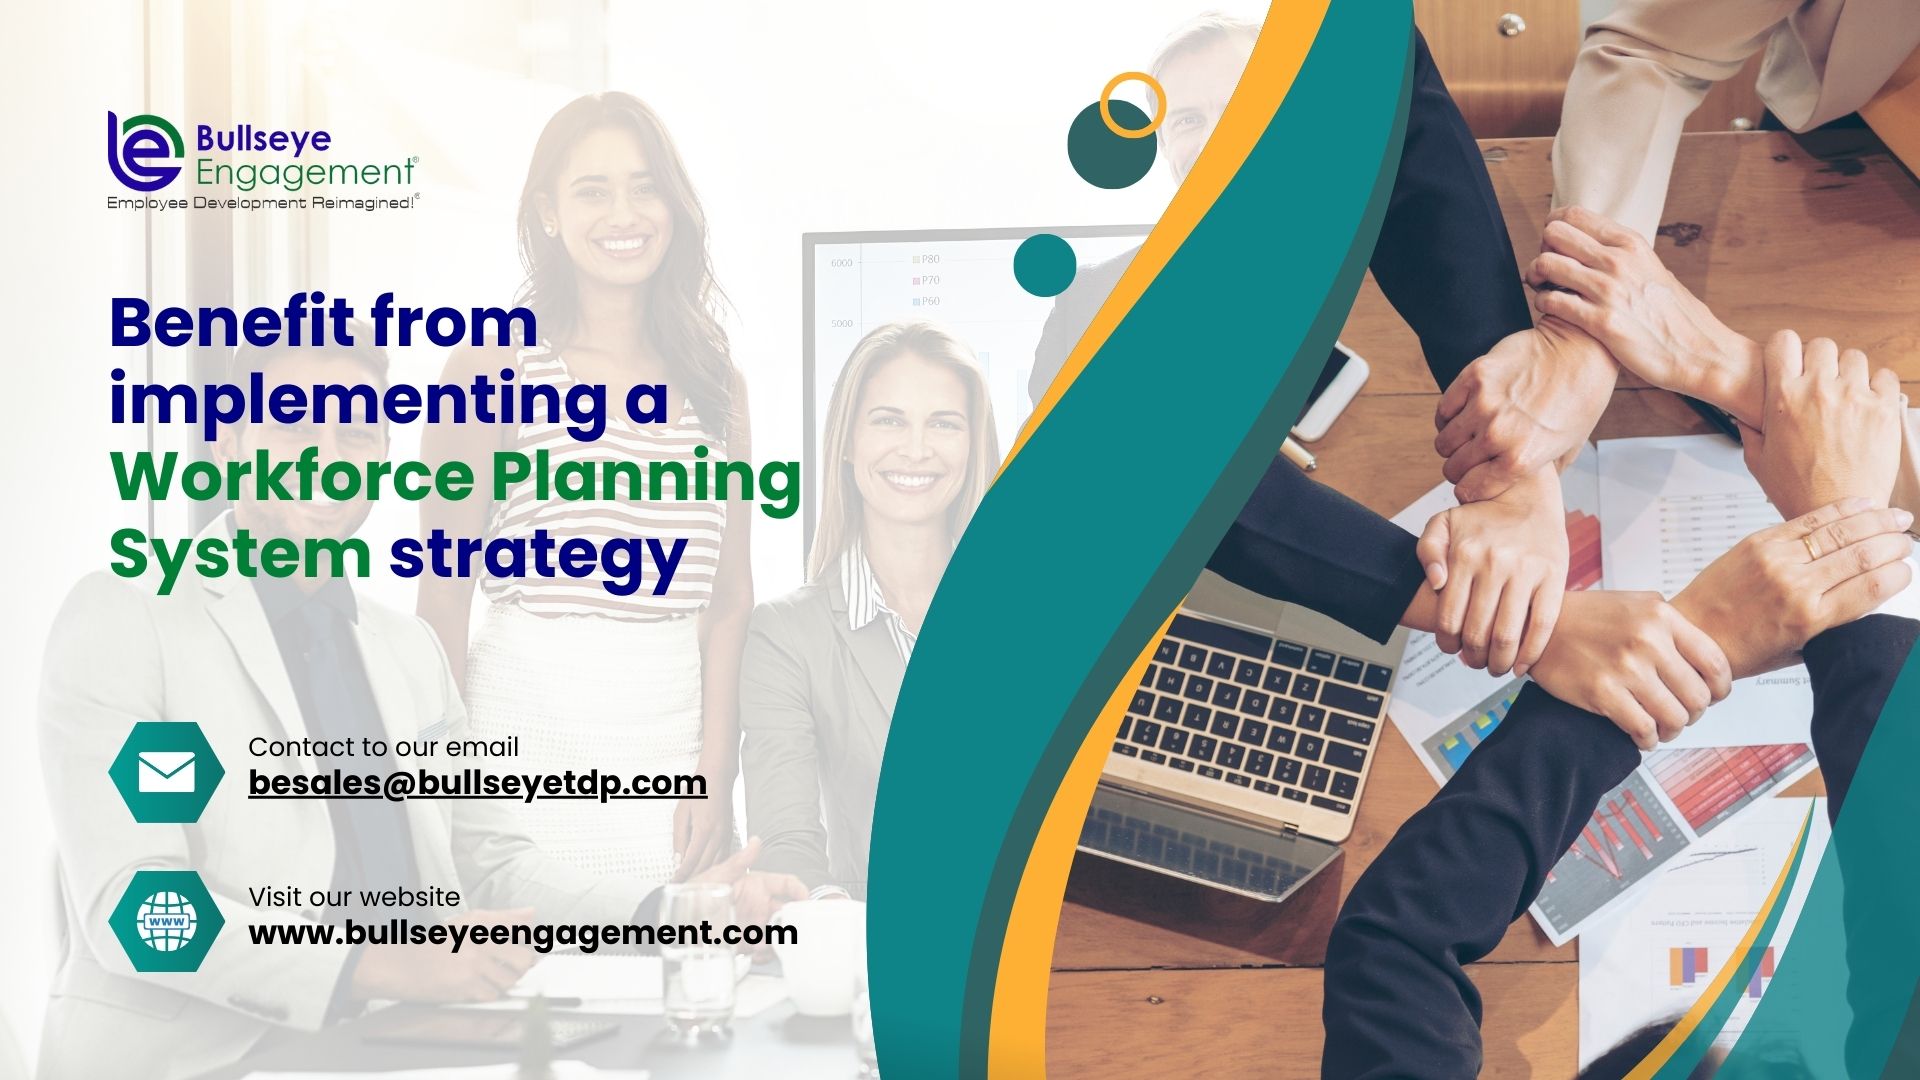 Why Every Business Needs a Workforce Planning System Strategy - BullseyeEngagement